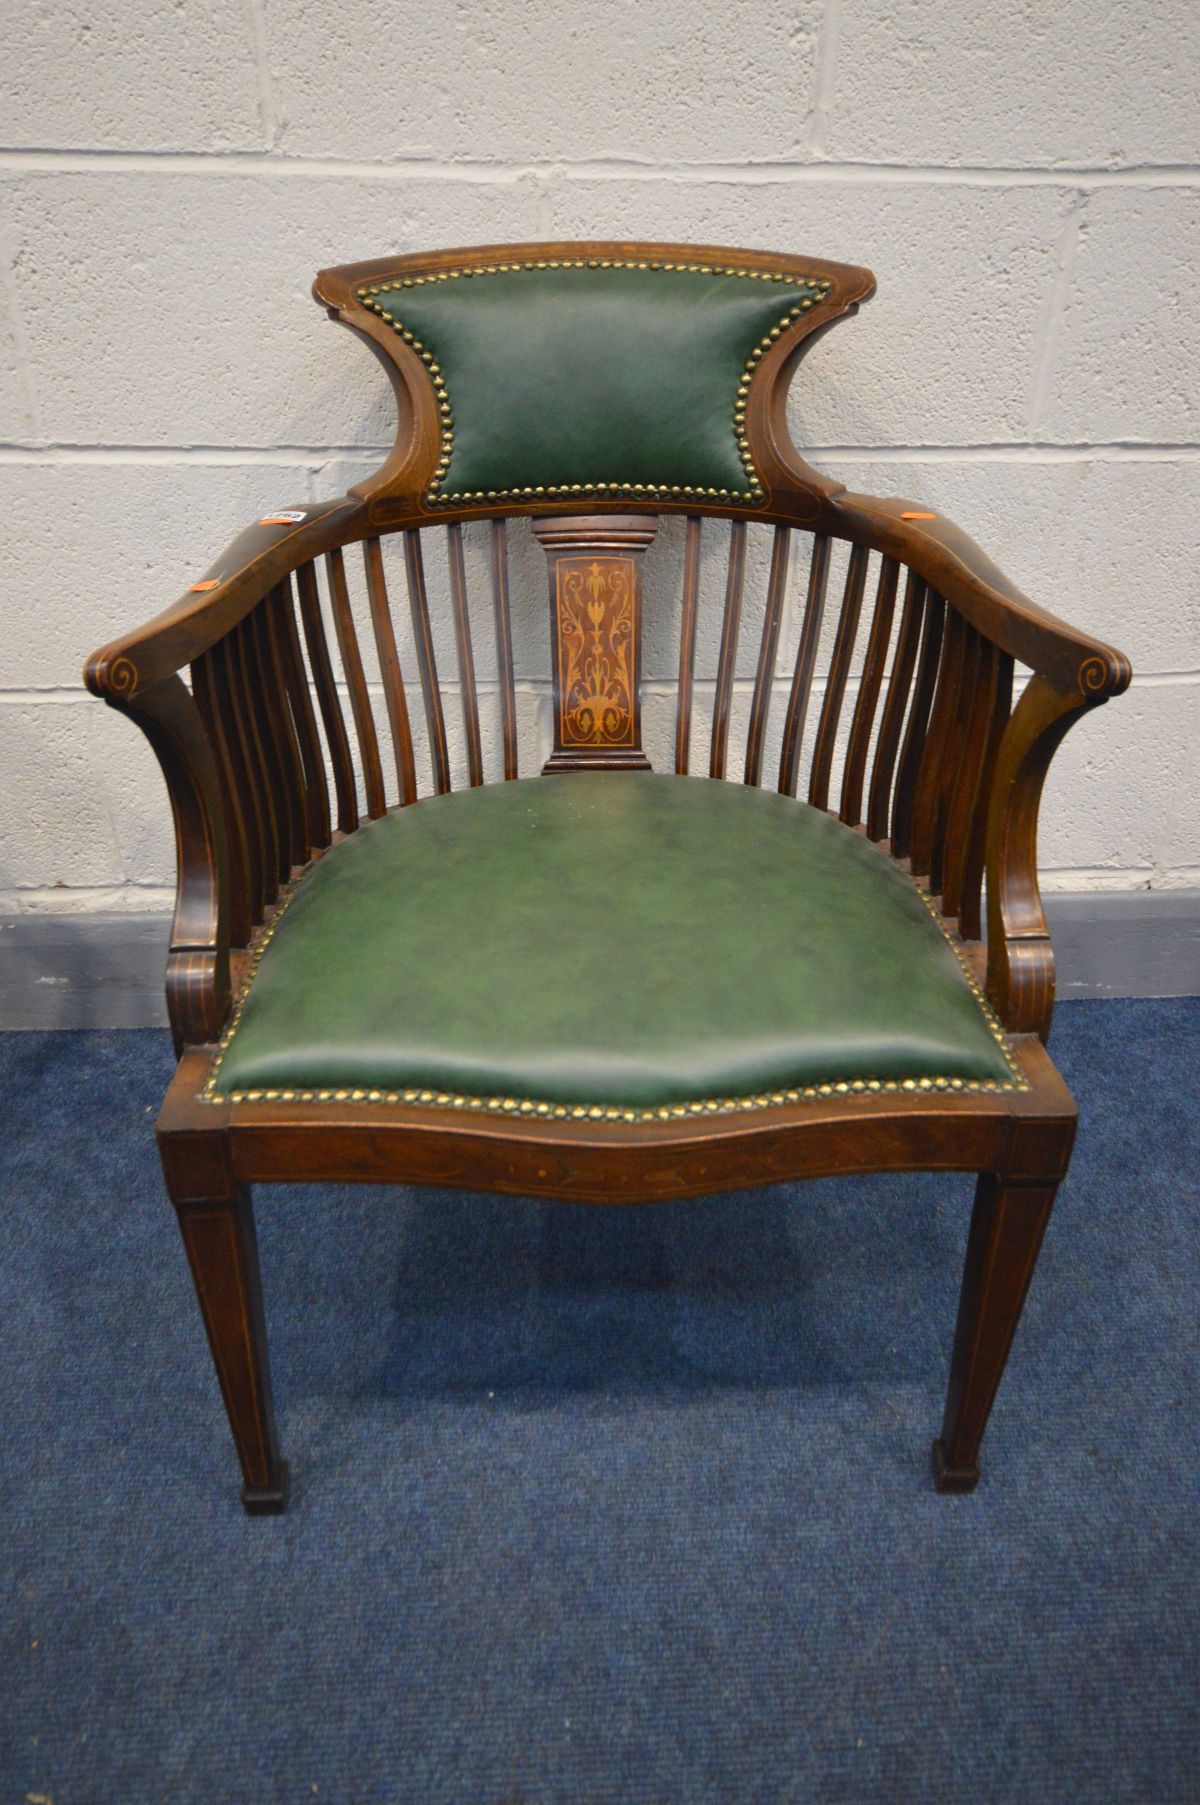 AN EDWARDIAN MAHOGANY AND MARQUETRY INLAID SQUARE SPINDLED BACK ARMCHAIR with green leather seat and